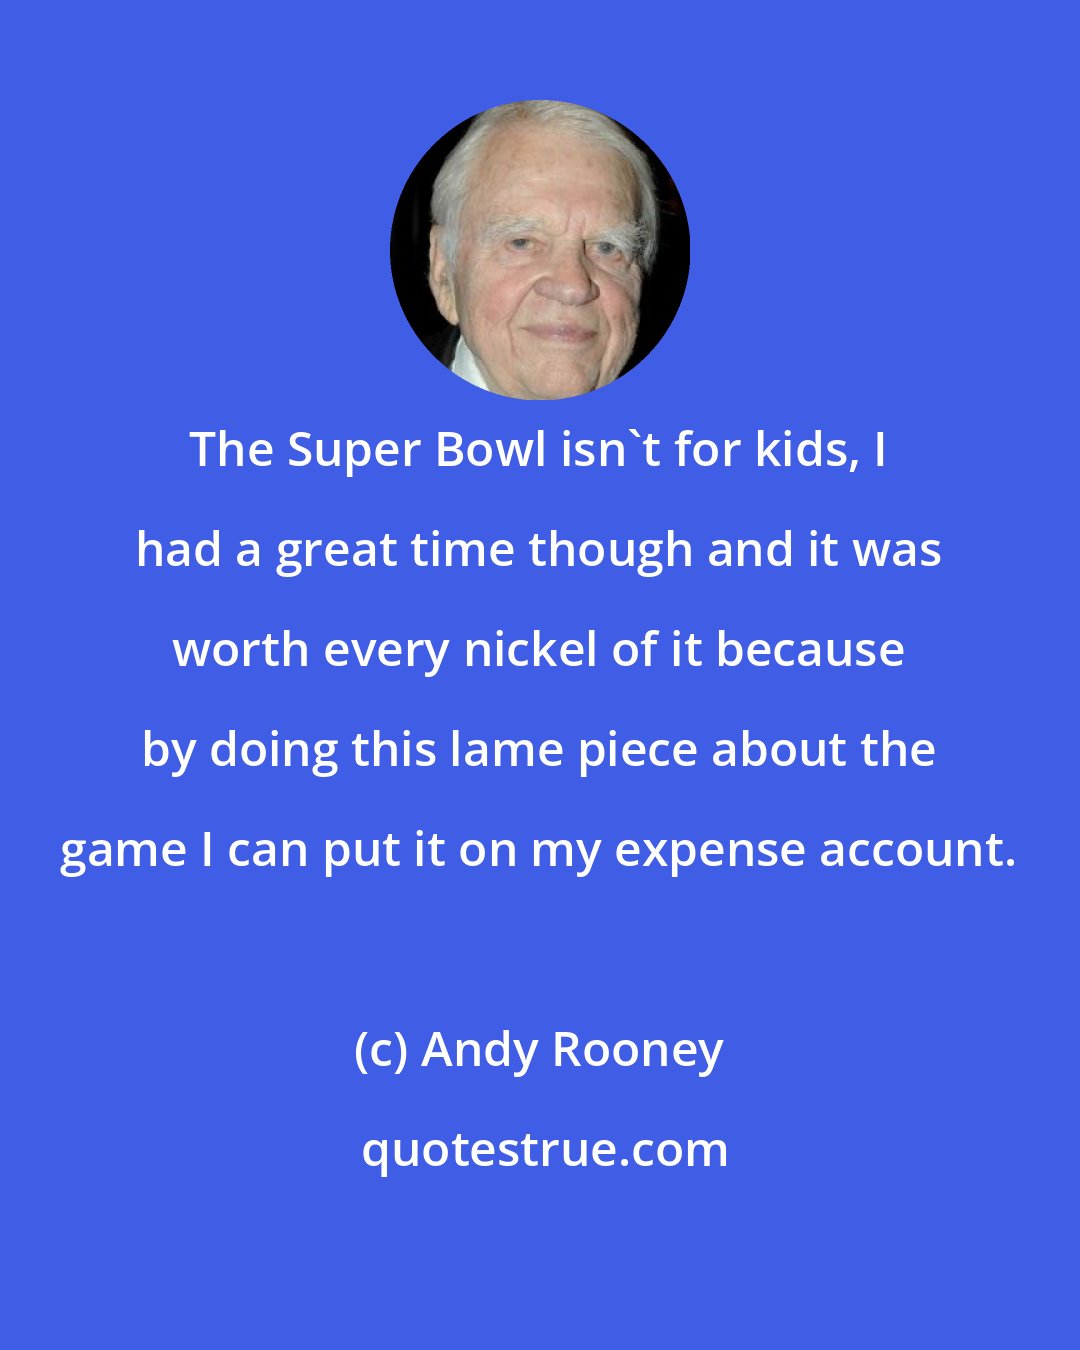 Andy Rooney: The Super Bowl isn't for kids, I had a great time though and it was worth every nickel of it because by doing this lame piece about the game I can put it on my expense account.